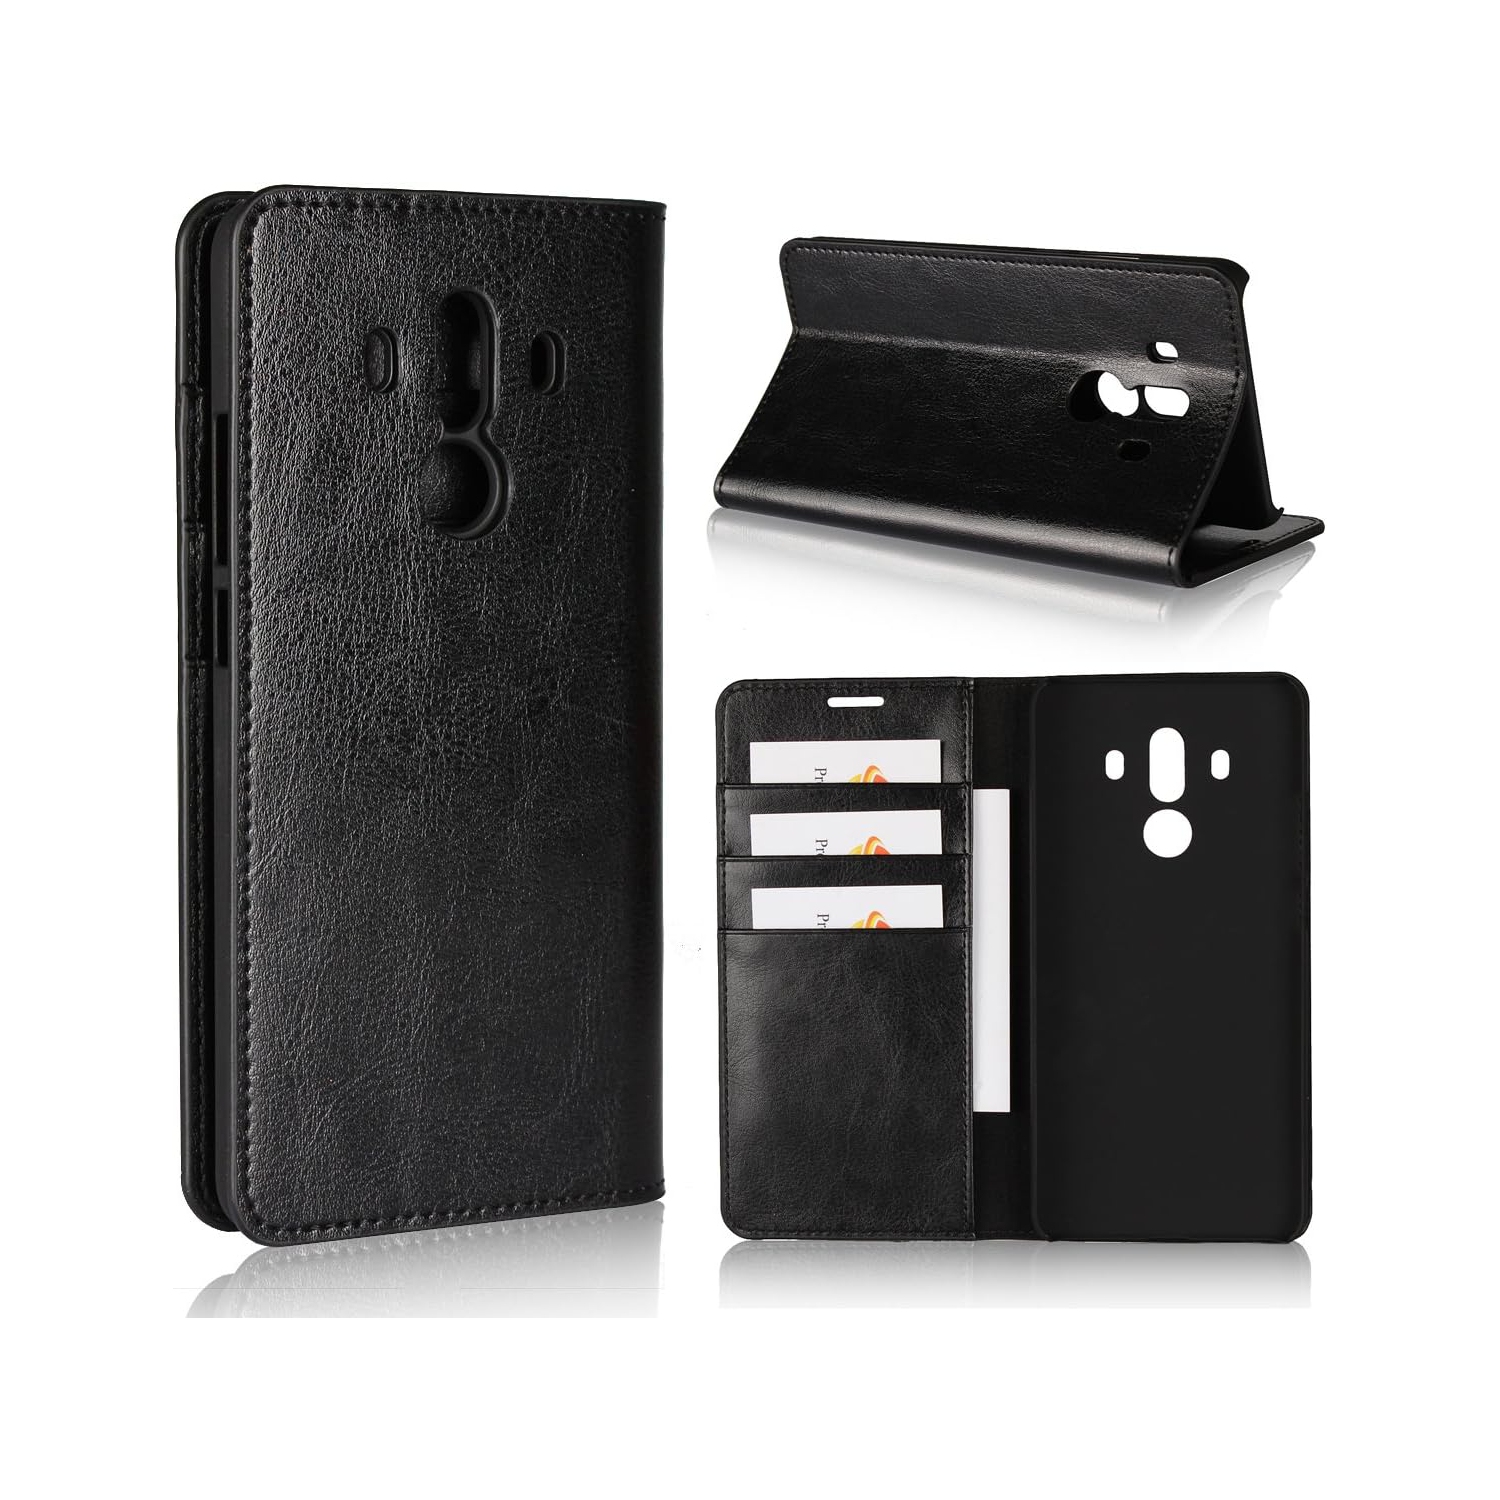 Huawei Mate 10 Pro Case, Genuine Leather Wallet Case [Slim Fit] Folio Book Design with Stand and Card Slots